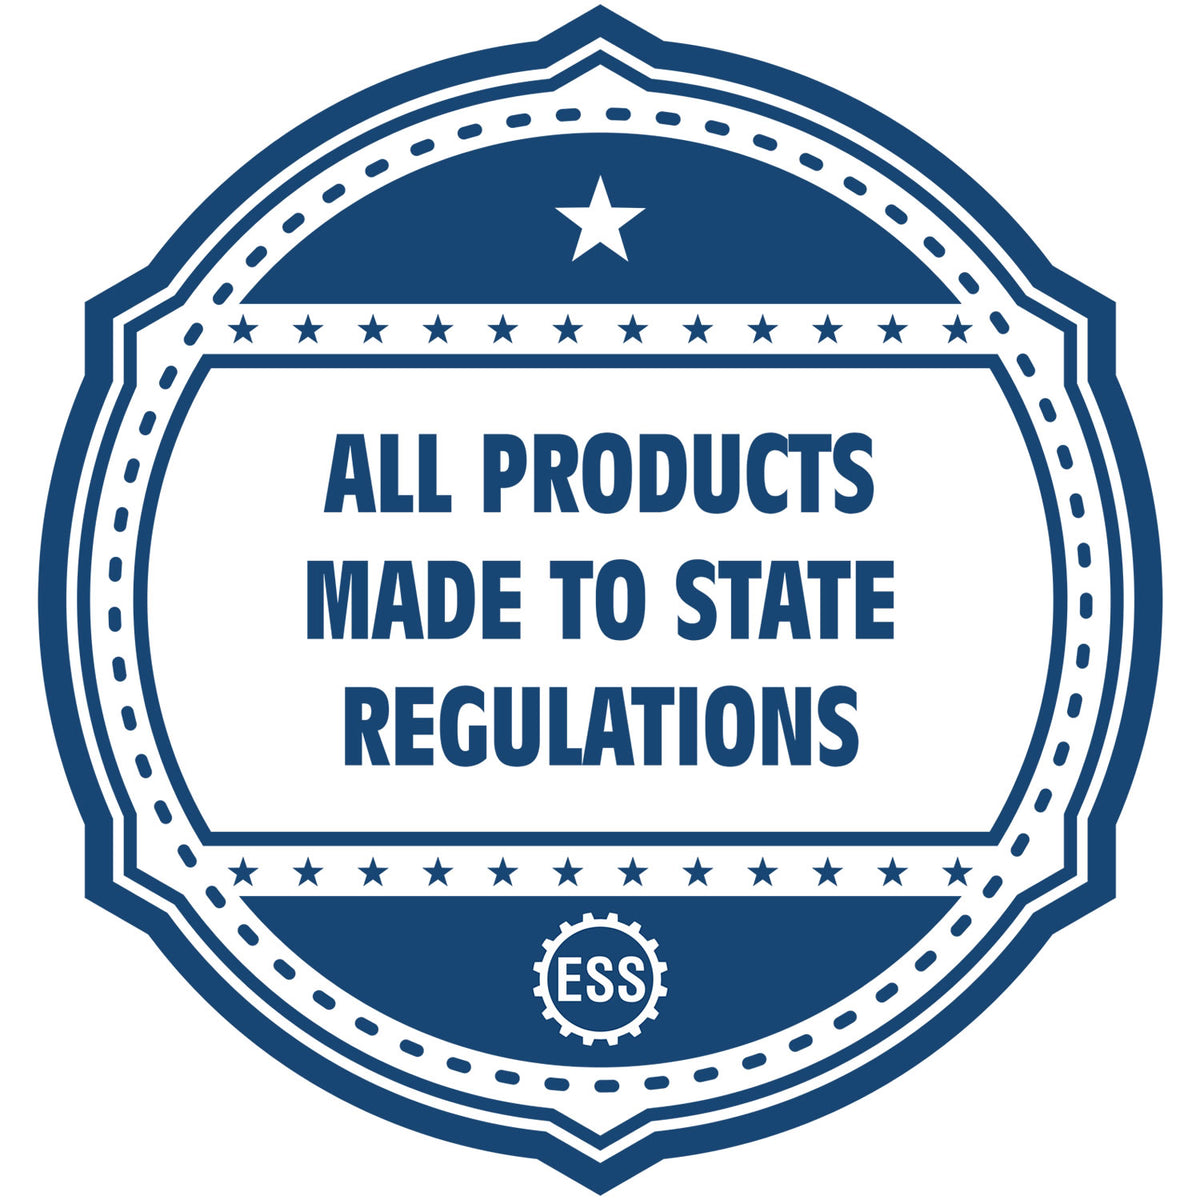 An icon or badge element for the Heavy Duty Cast Iron Arkansas Engineer Seal Embosser showing that this product is made in compliance with state regulations.